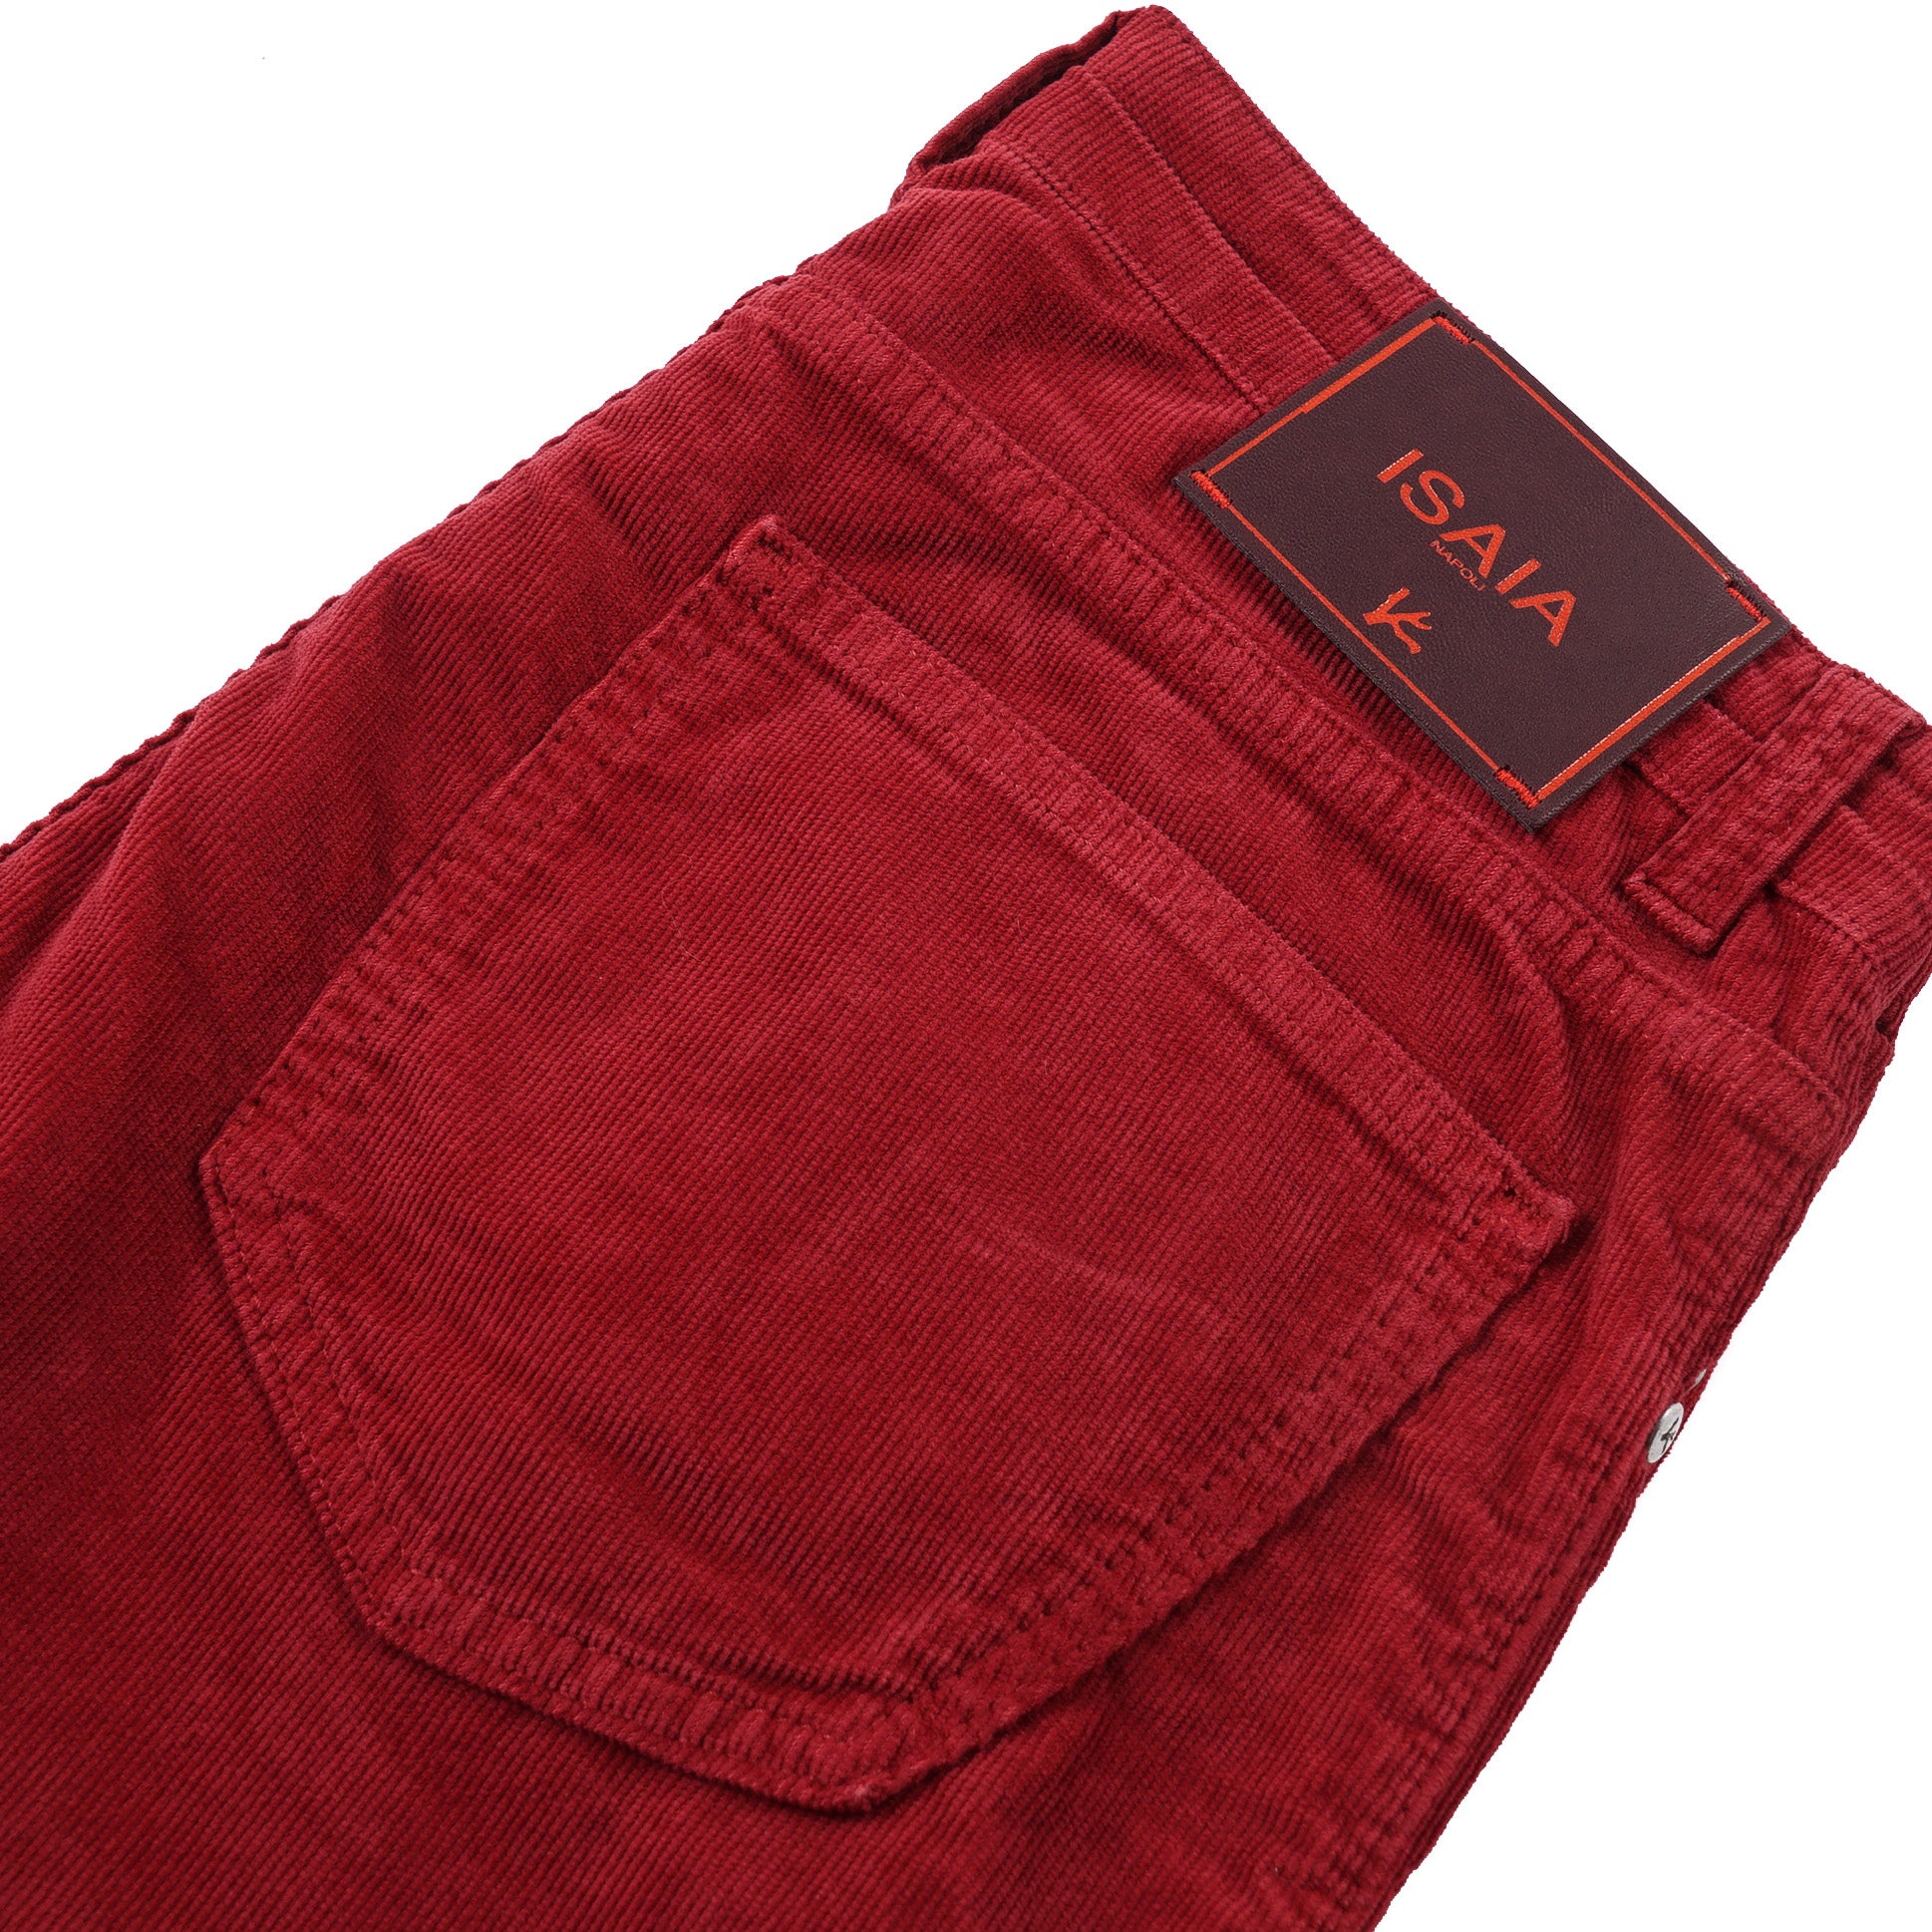 Buy Men's Dusty wrinkle Cotton Jeans in India at best Wholesale prices